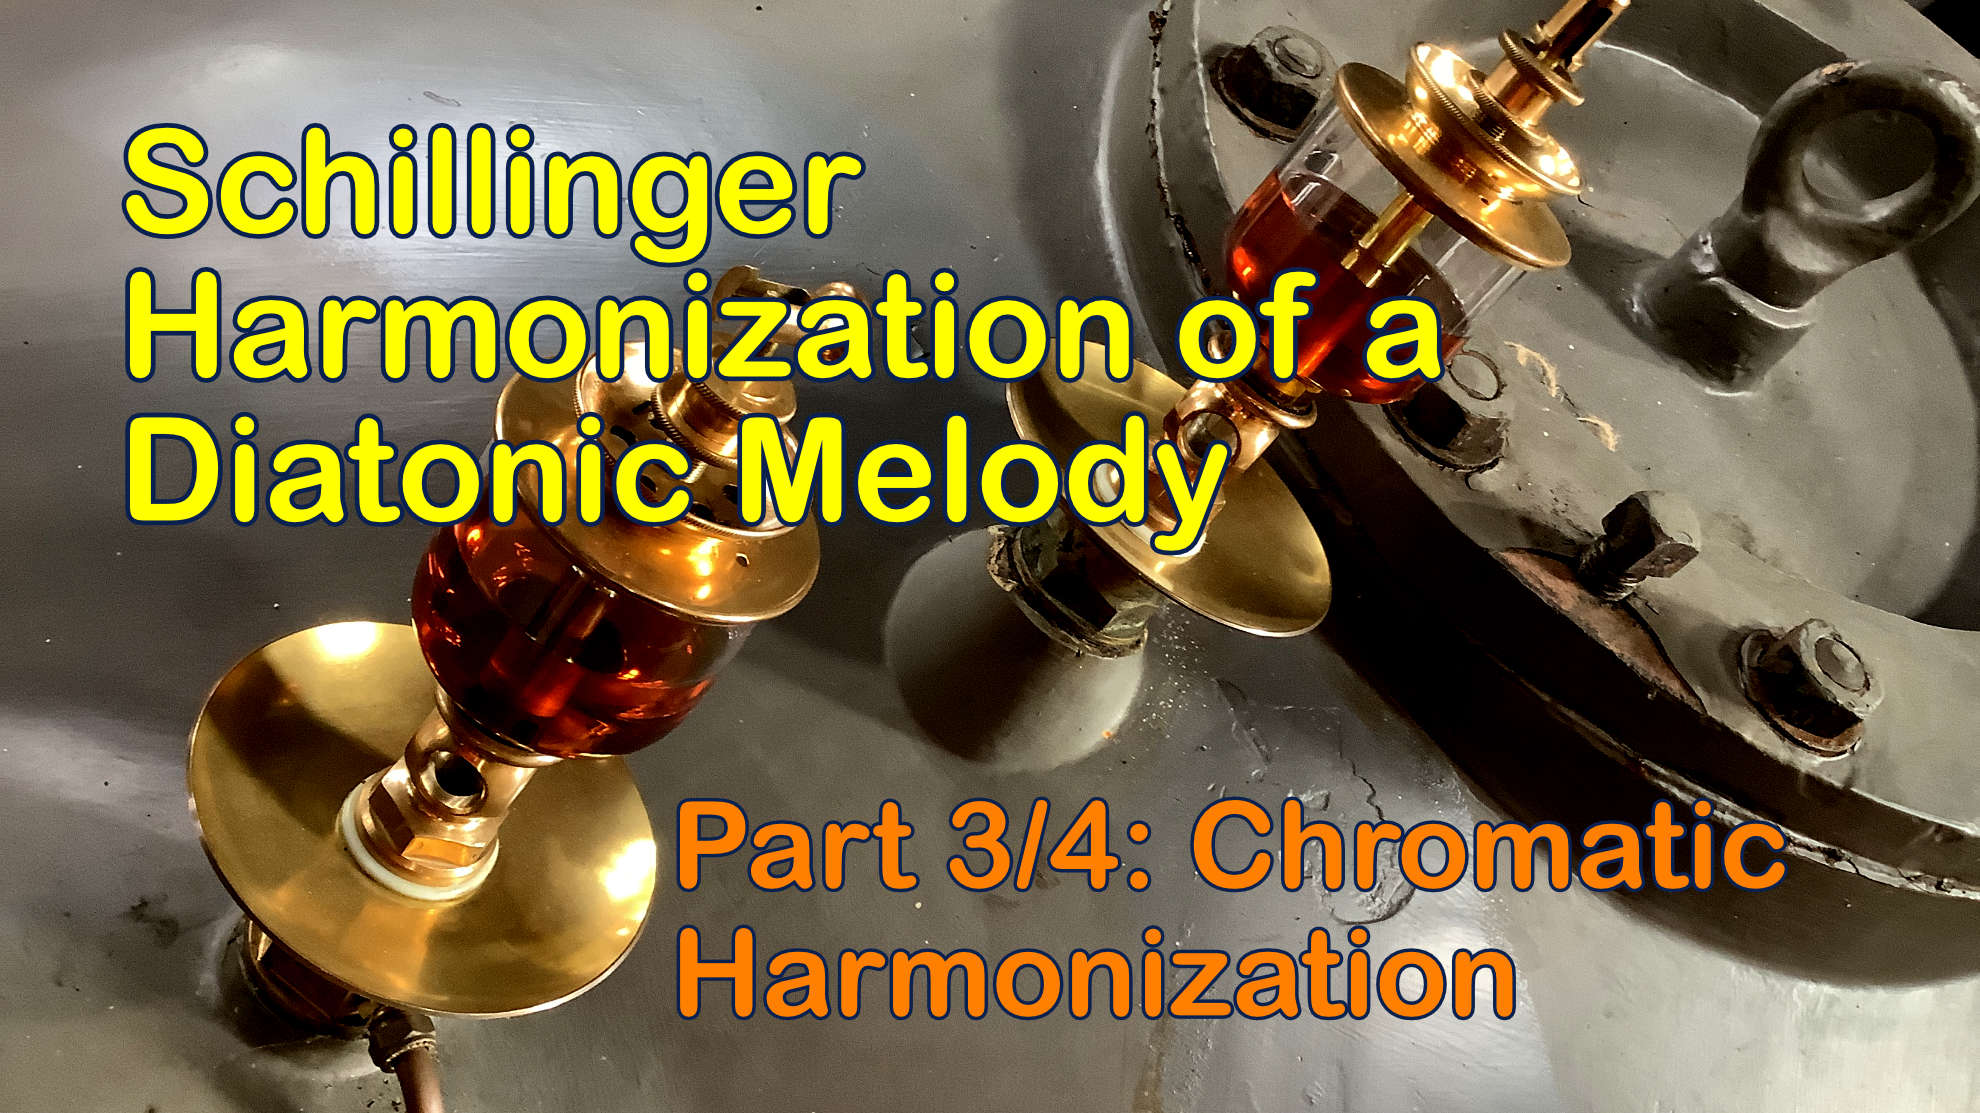 YouTube thumbnail for the Schillinger Harmonization of a Diatonic Melody Part 3 video tutorial